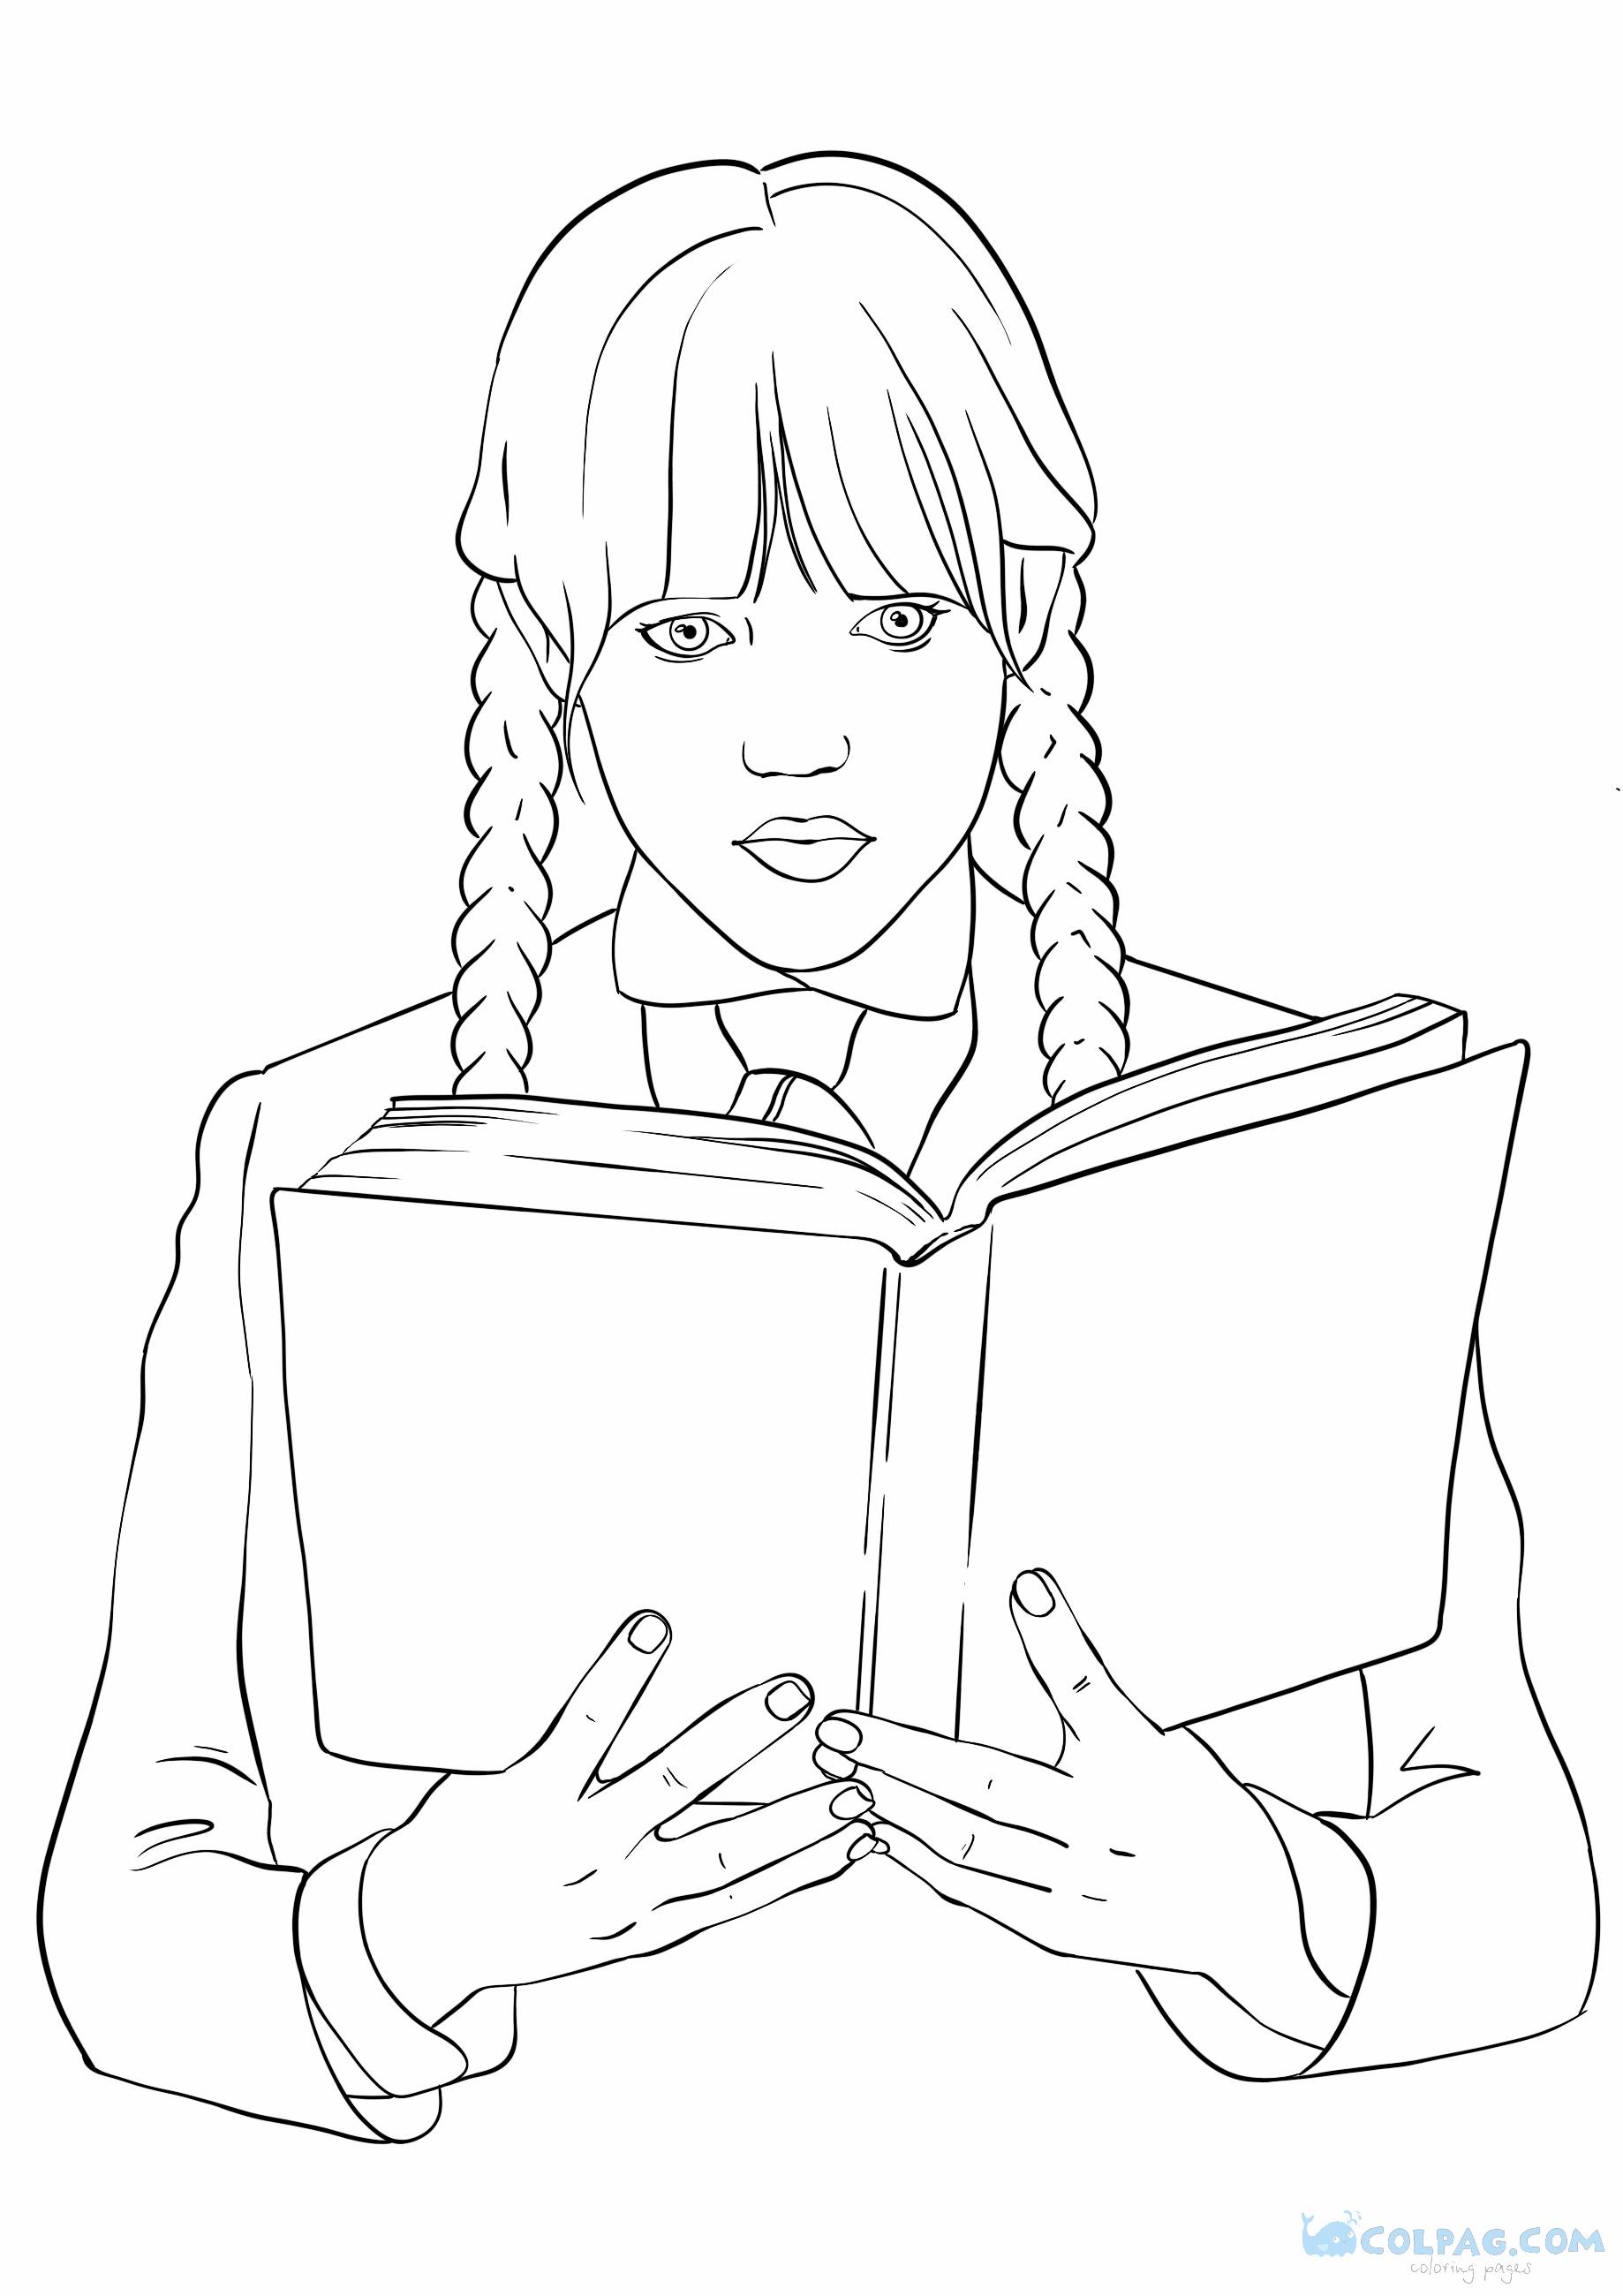 wednesday-addams-coloring-page-colpag-com-9